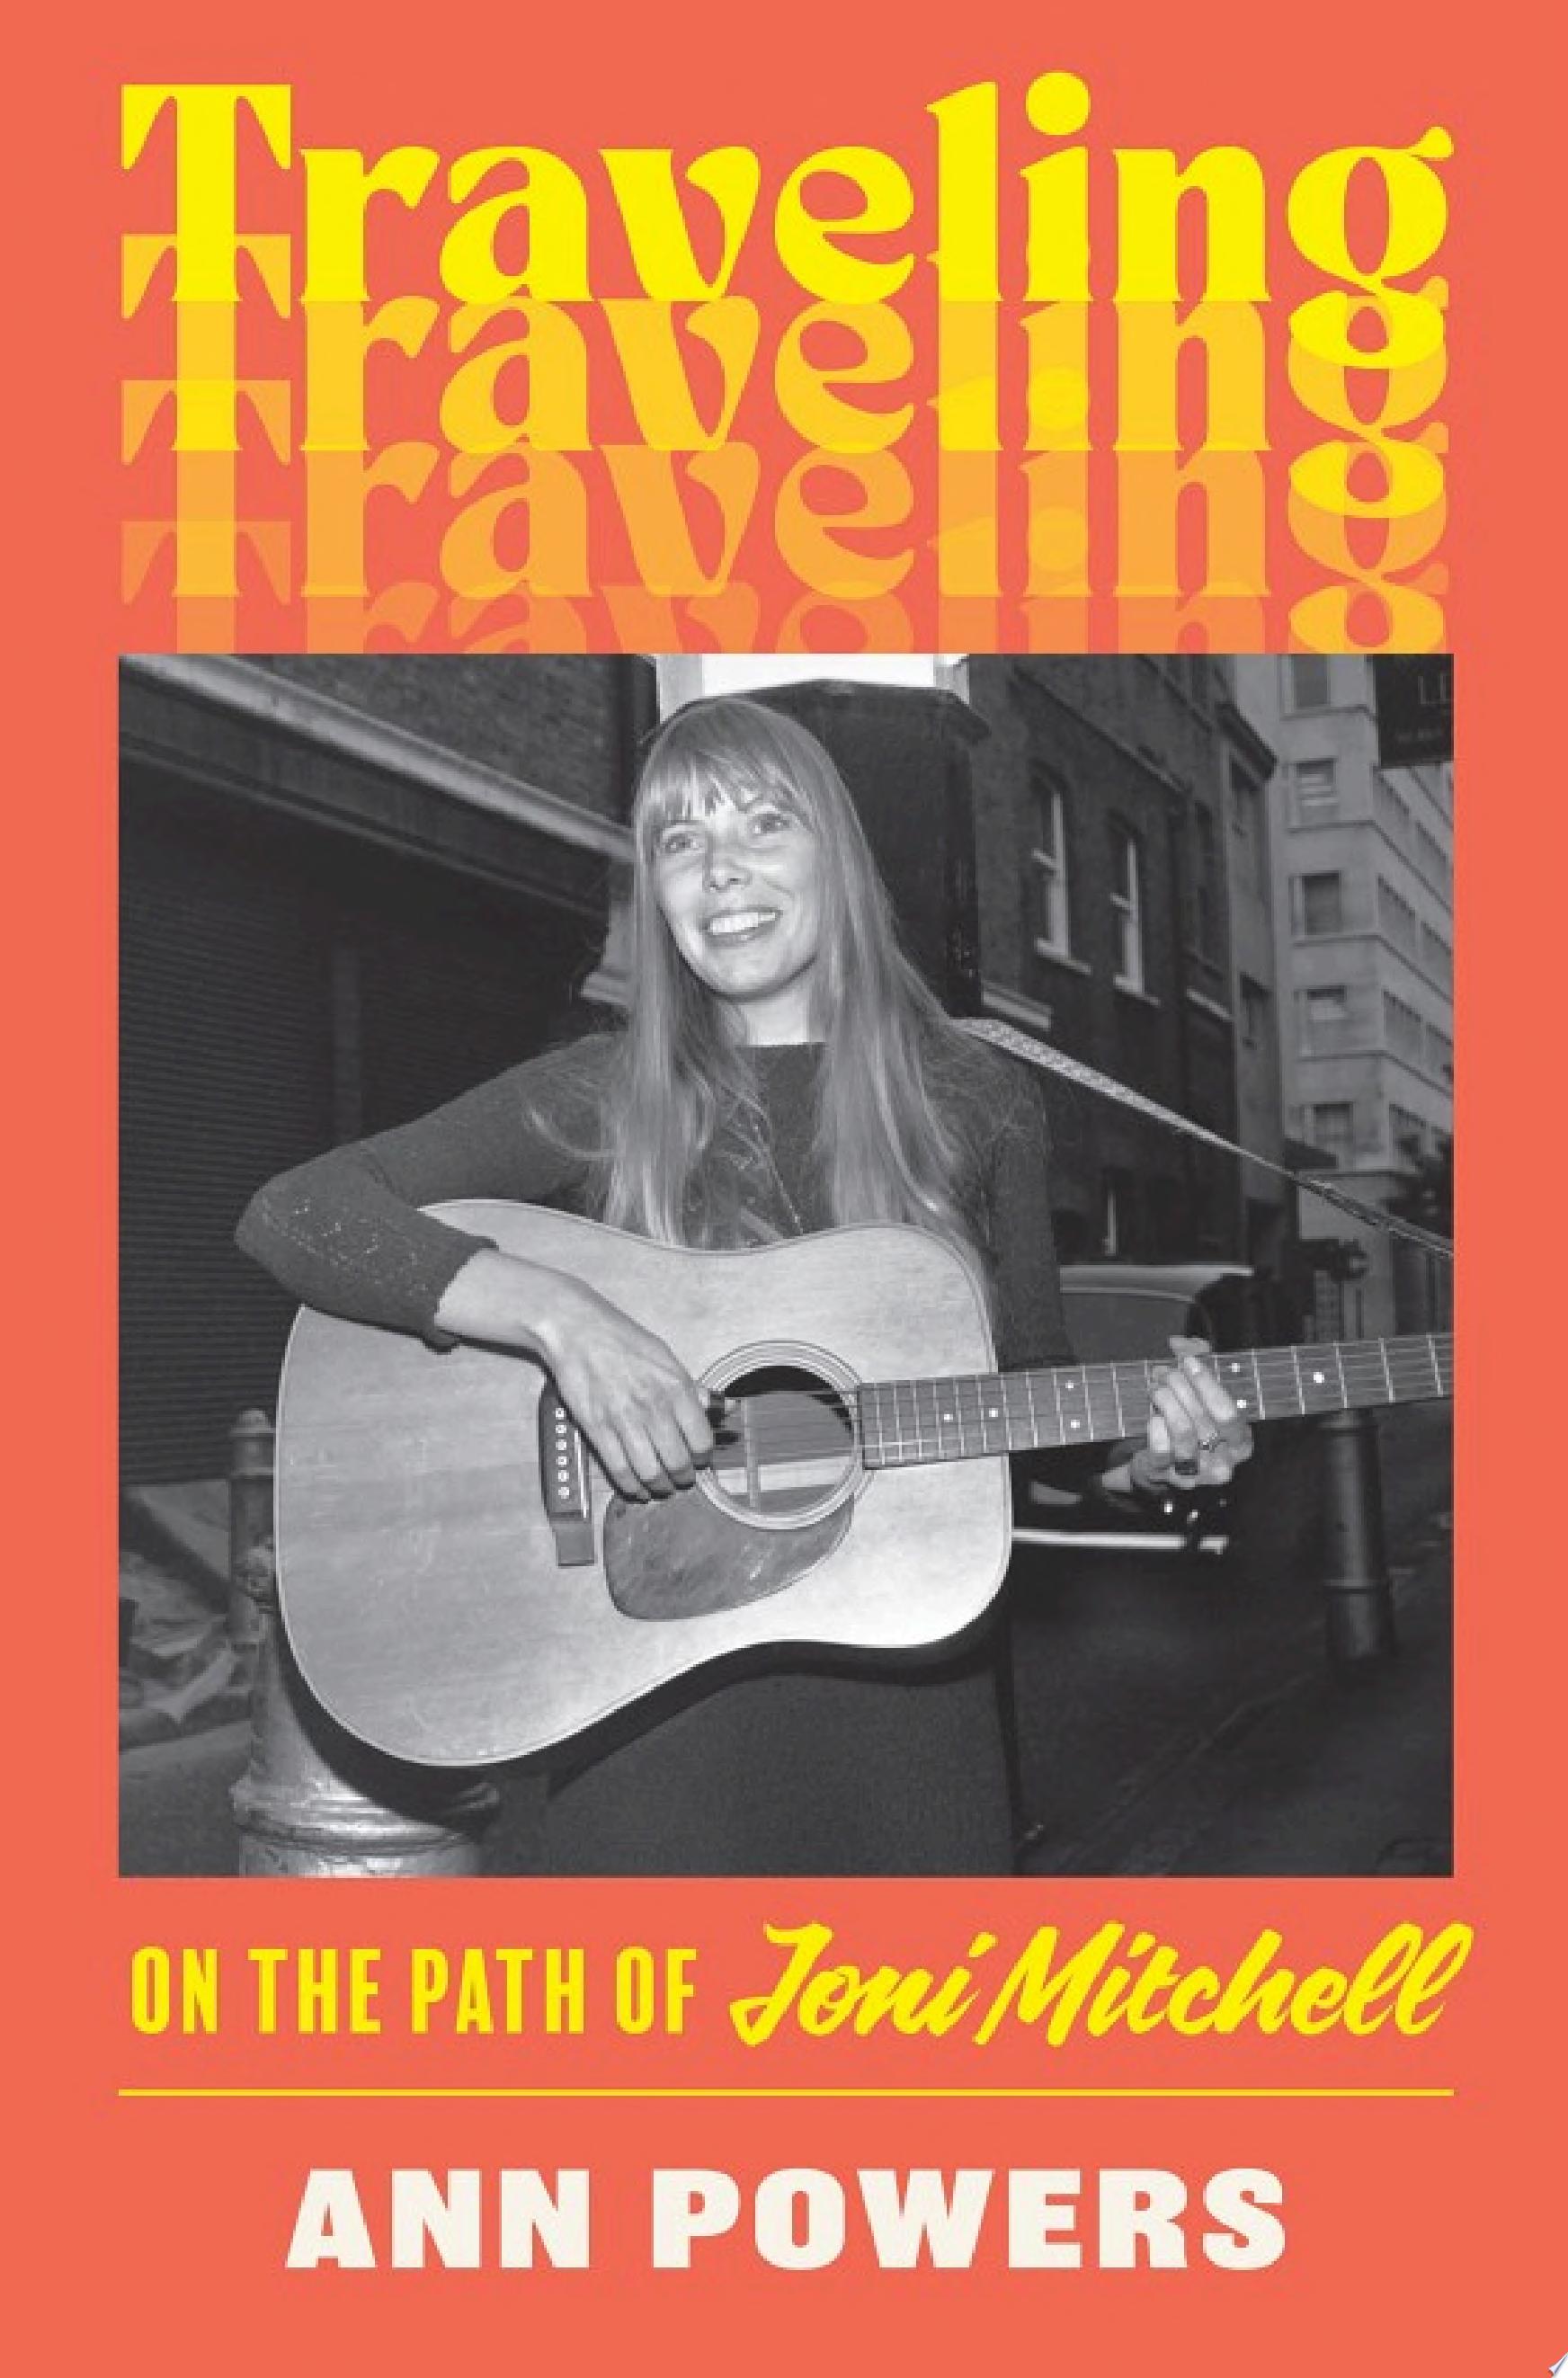 Image for "Traveling"